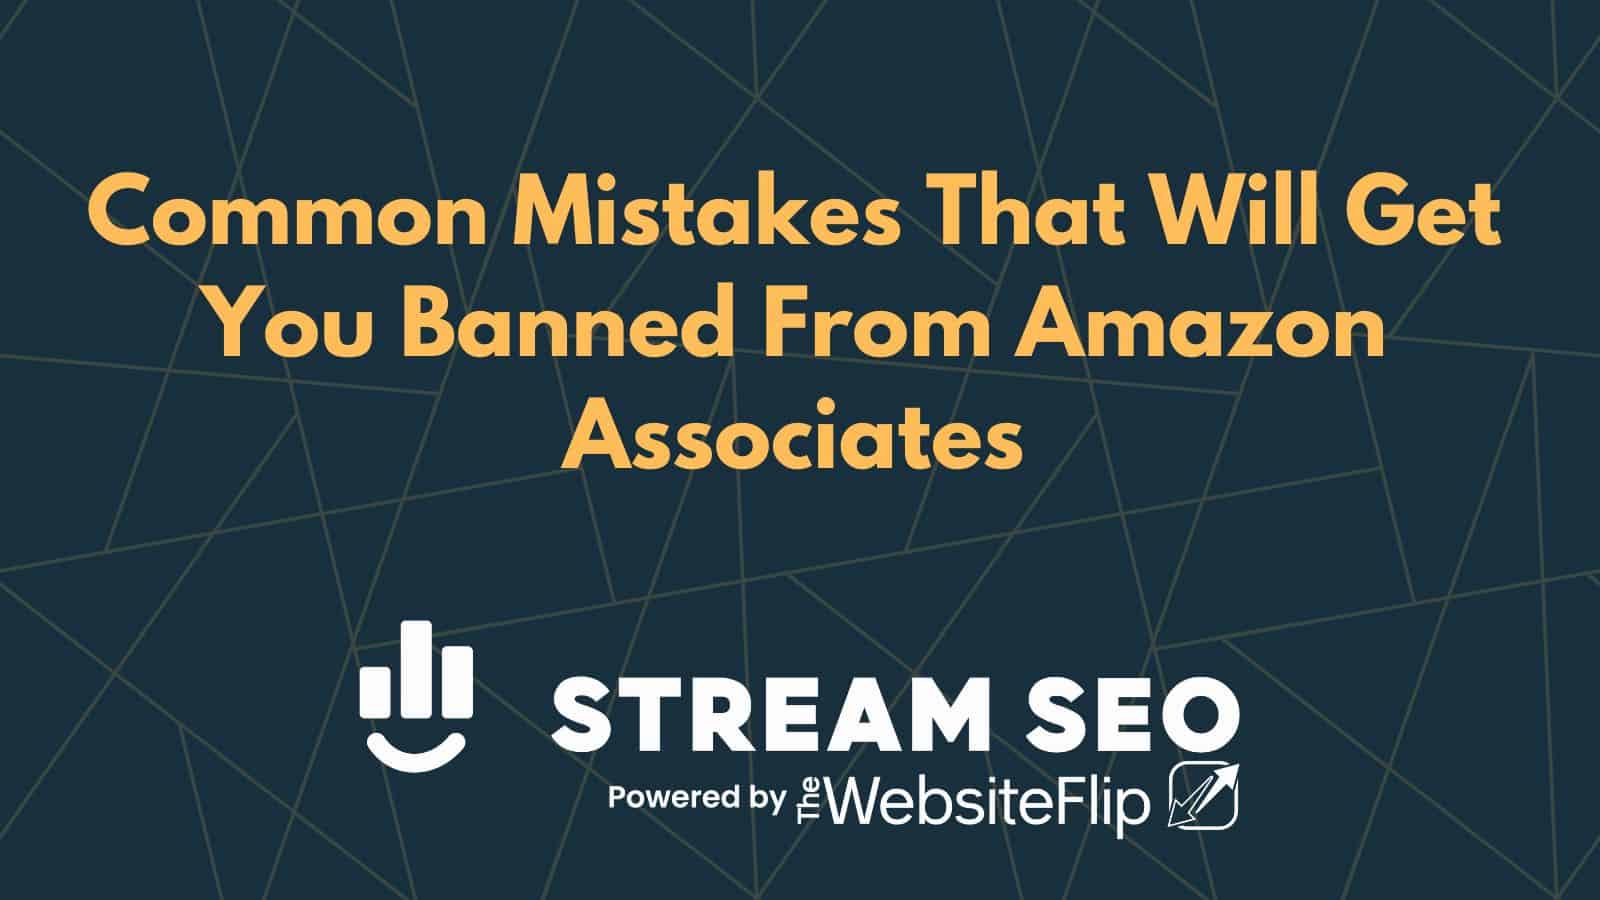 7 Common Mistakes That Will Get You Banned From Amazon Associates